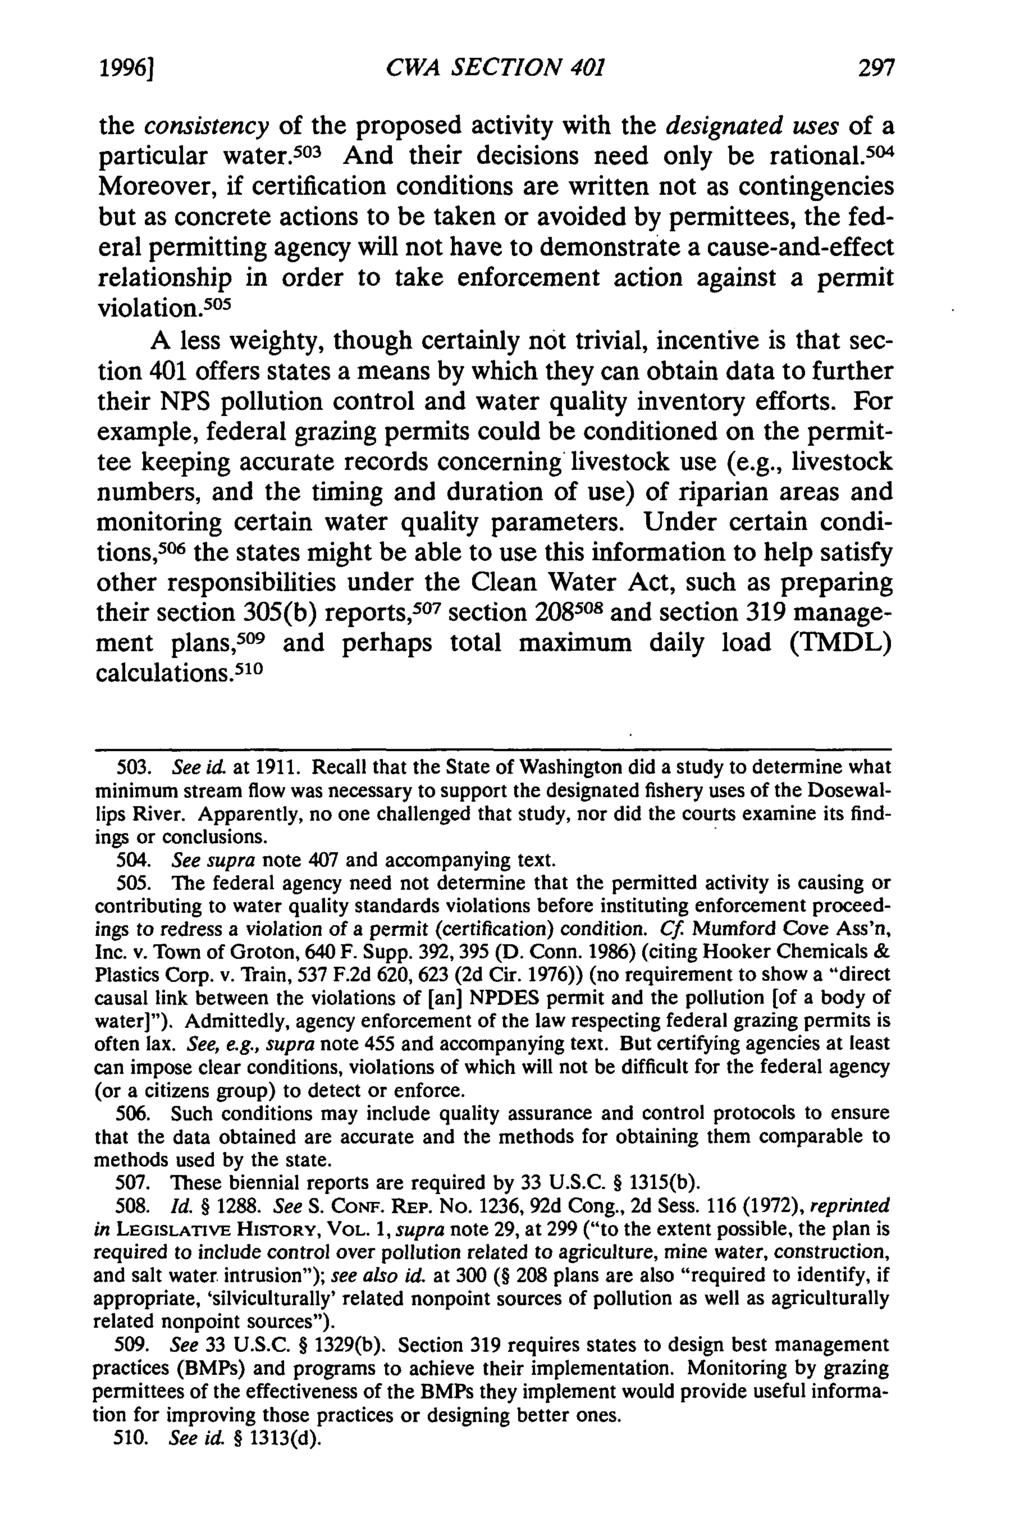 1996] CWA SECTION 401 the consistency of the proposed activity with the designated uses of a particular water. 503 And their decisions need only be rational.